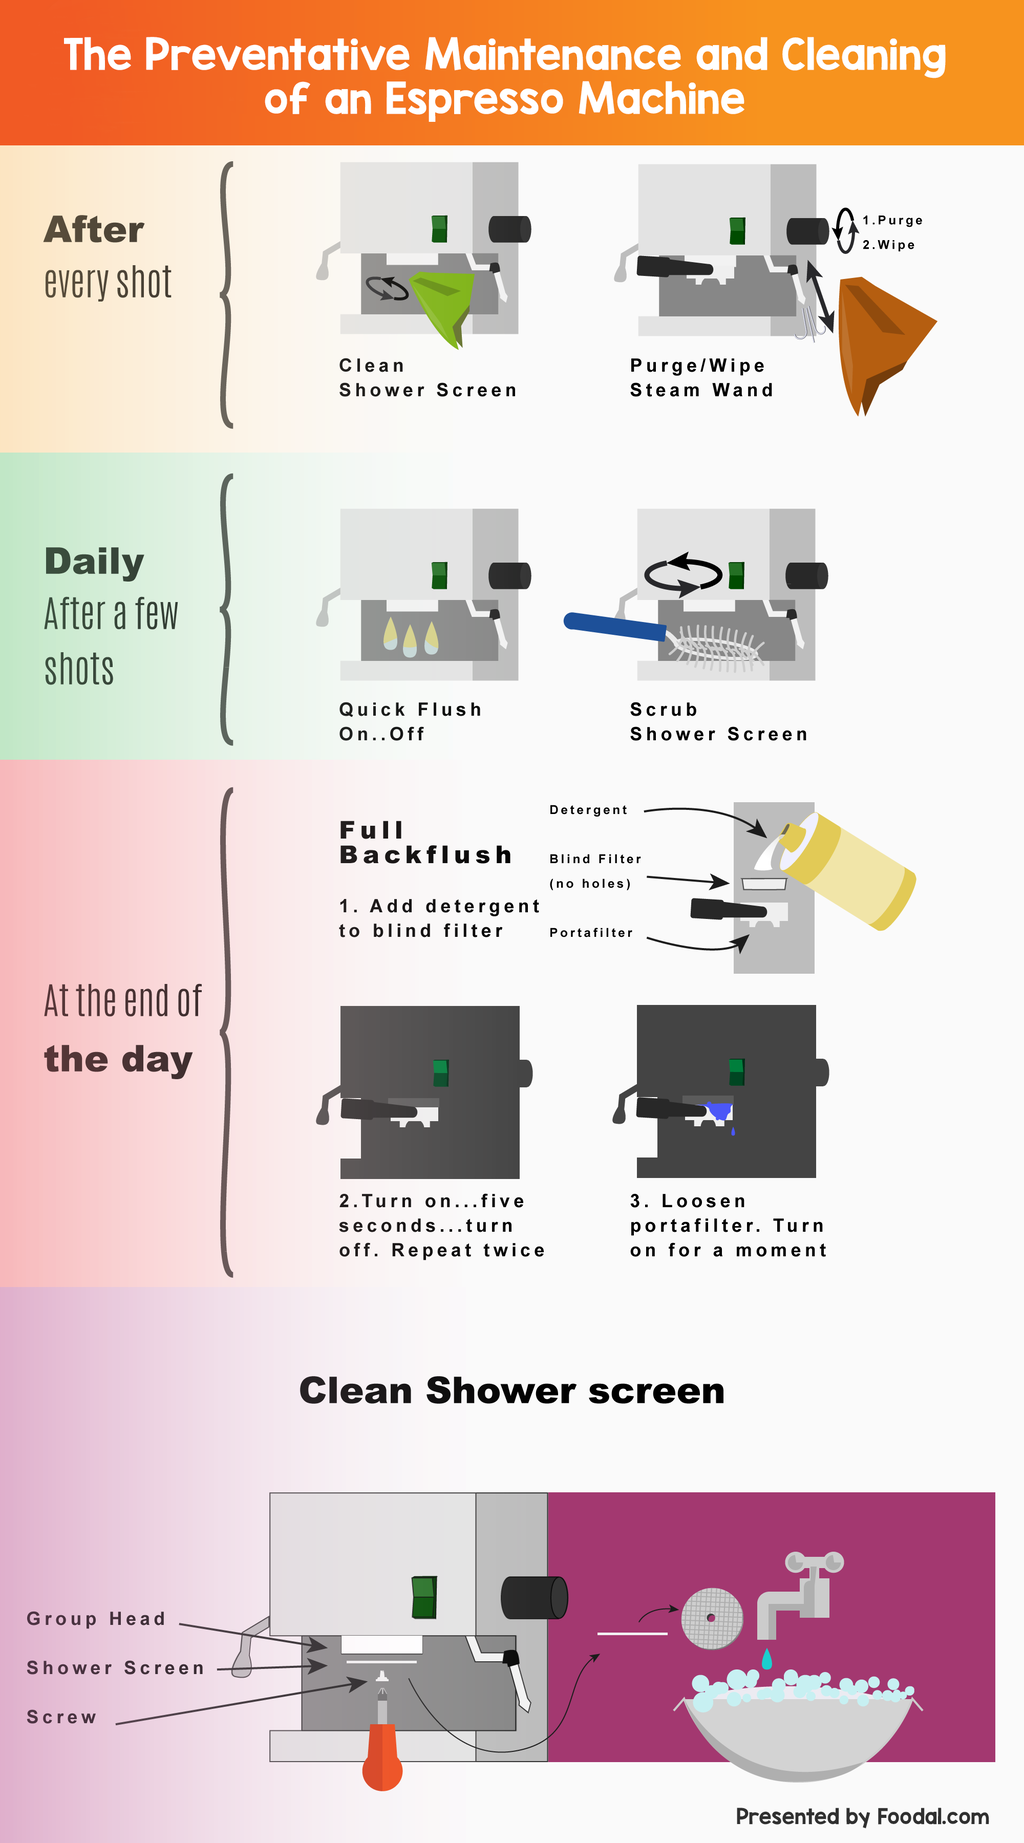 Preventative Maintenance and Cleaning of an Espresso Machine Infographic | Foodal.com